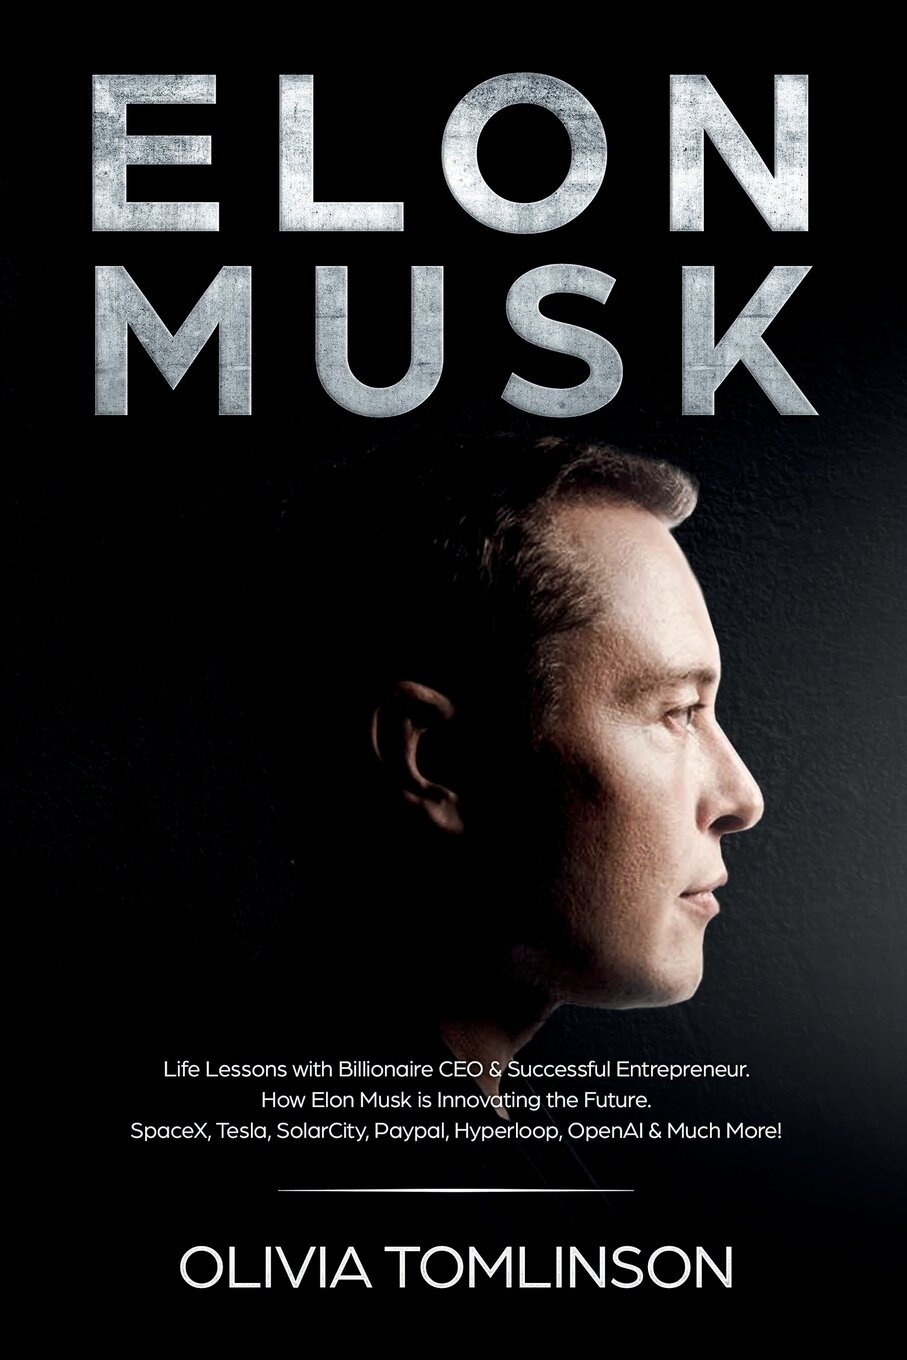 Elon Musk. Life Lessons with Billionaire CEO & Successful Entrepreneur. How Elon Musk is Innovating the Future